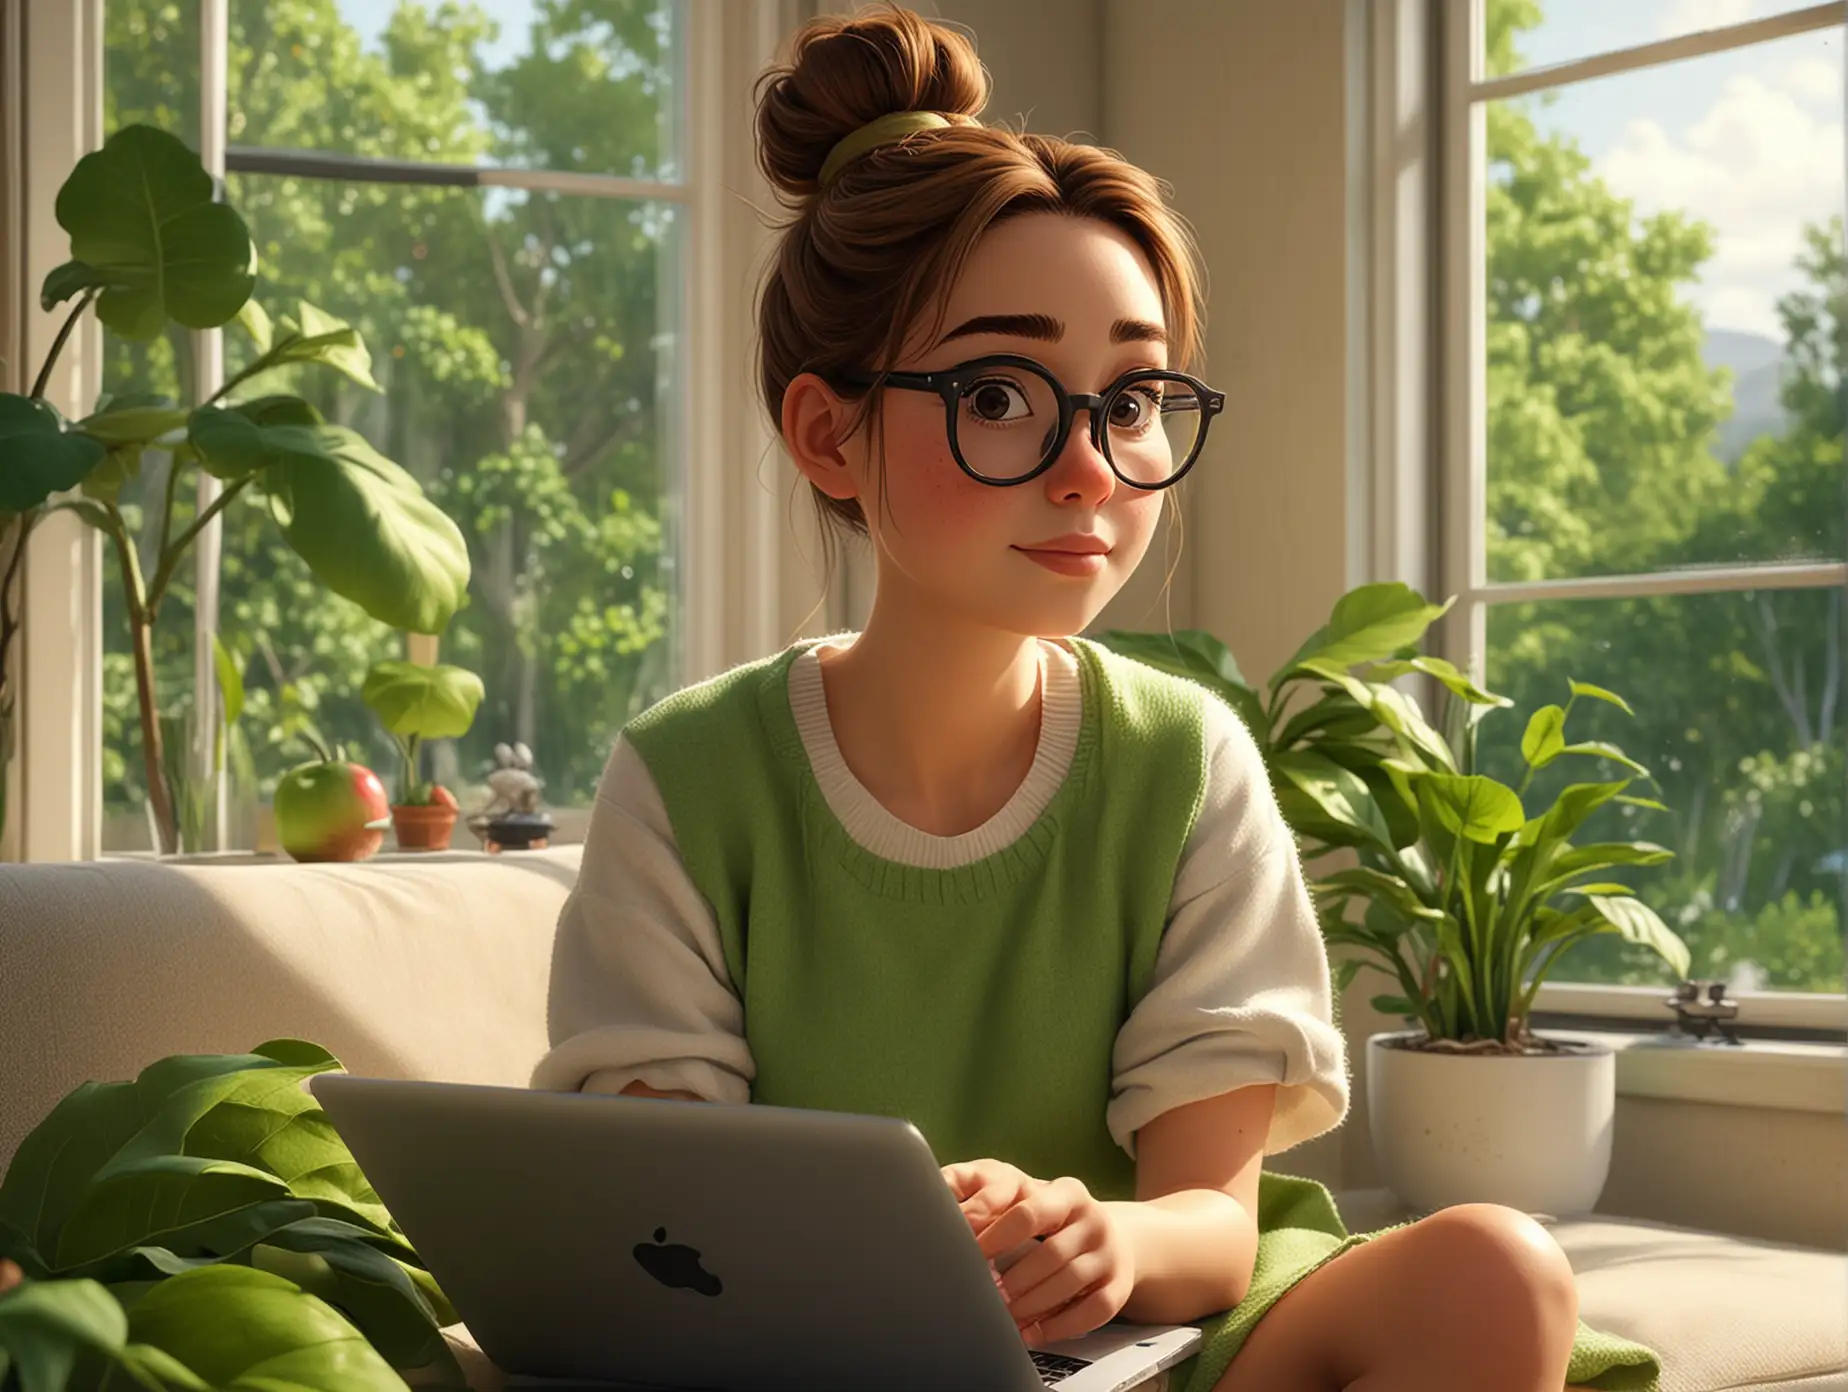 Pixar style, female, with a bun hairstyle, wearing glasses, comfortable to wear, working from home. Sitting on the sofa, holding an Apple computer, behind you is a large French window, and outside the window is a green landscape. There are green plants at home.